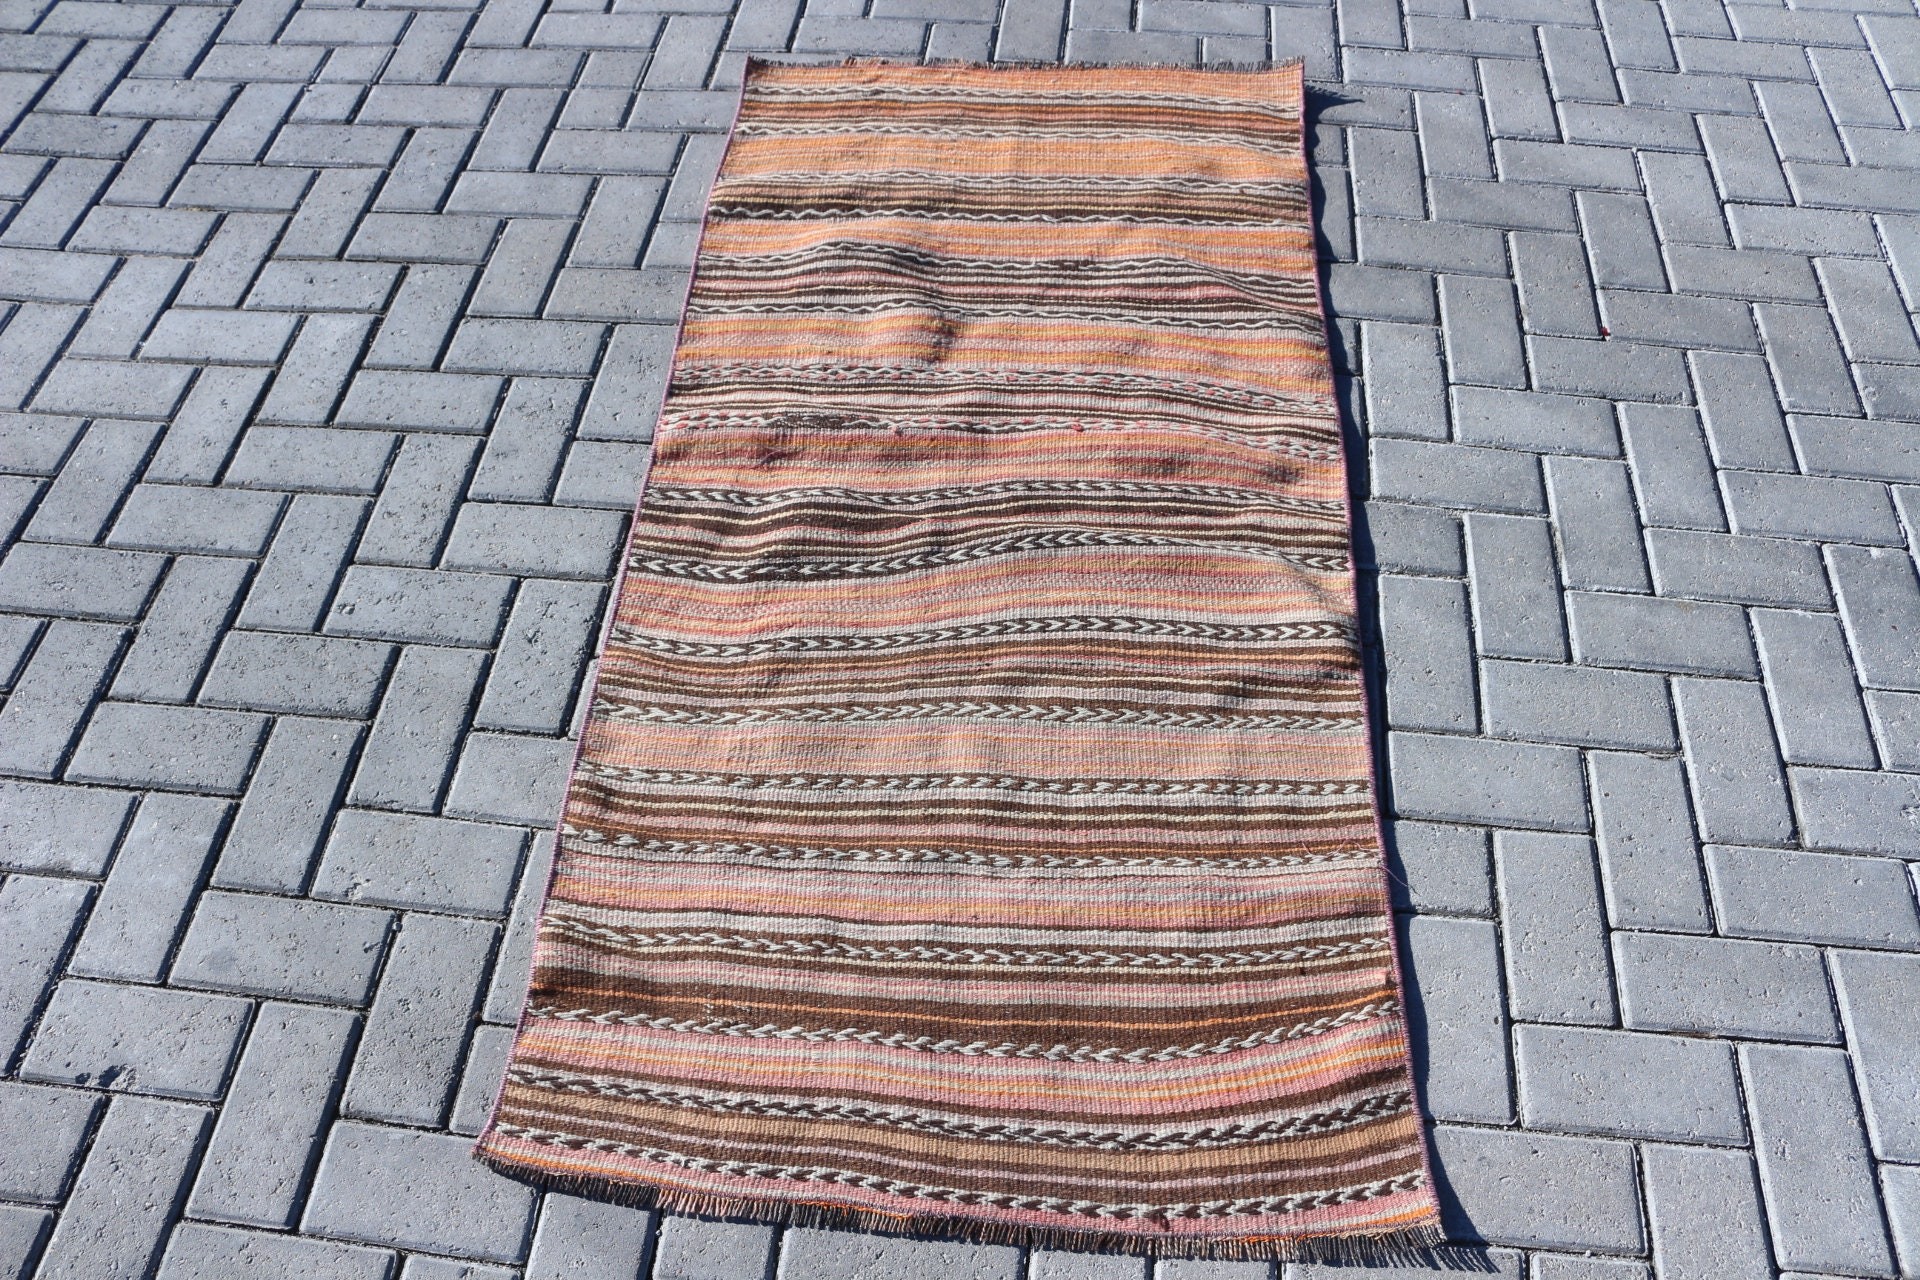 Car Mat Rug, Brown Moroccan Rugs, Wool Rug, Vintage Rug, Kilim, Old Rug, 2.6x5.3 ft Small Rugs, Rugs for Entry, Turkish Rug, Kitchen Rug